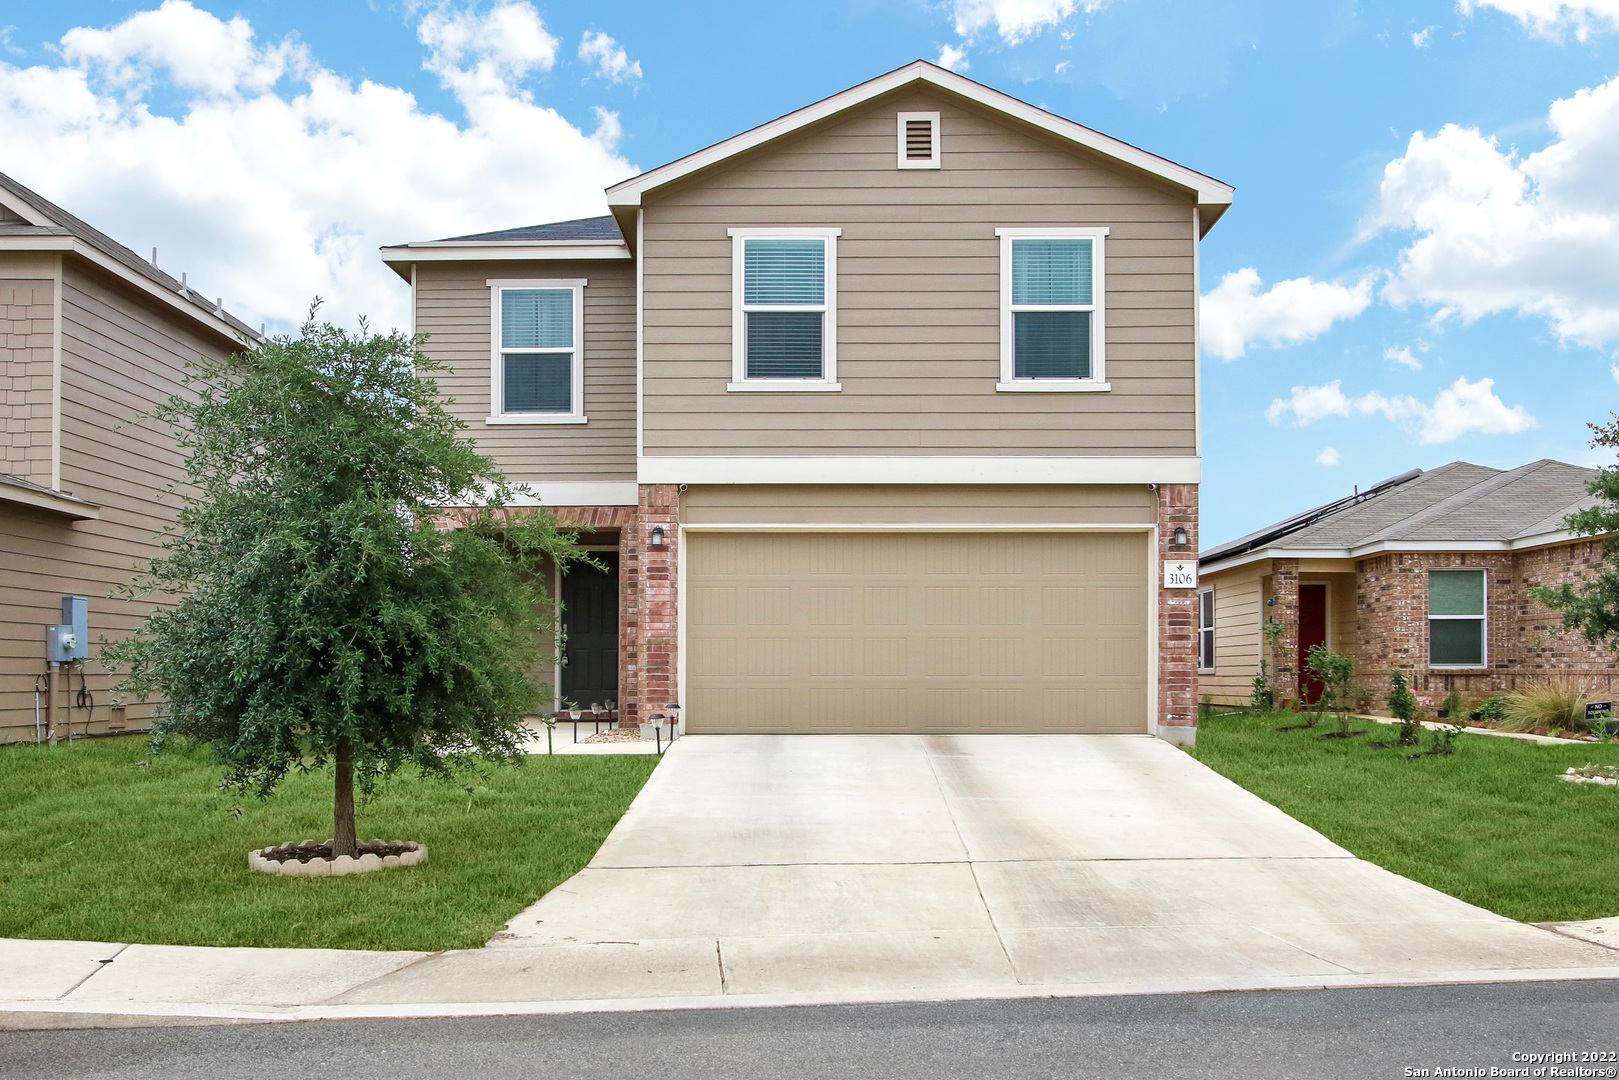 Come check out this gorgeous home!! Minutes away from major highways. Home was recently built in  2020. Beautiful features from the flooring to cabinets. Well taken care of, warranty will transfer to new  home owner. Fridge, stove, washer & dryer, dishwasher, etc will be transferred to new home owner.  OPEN HOUSE will be 5/14 & 5/15 12pm-4pm.